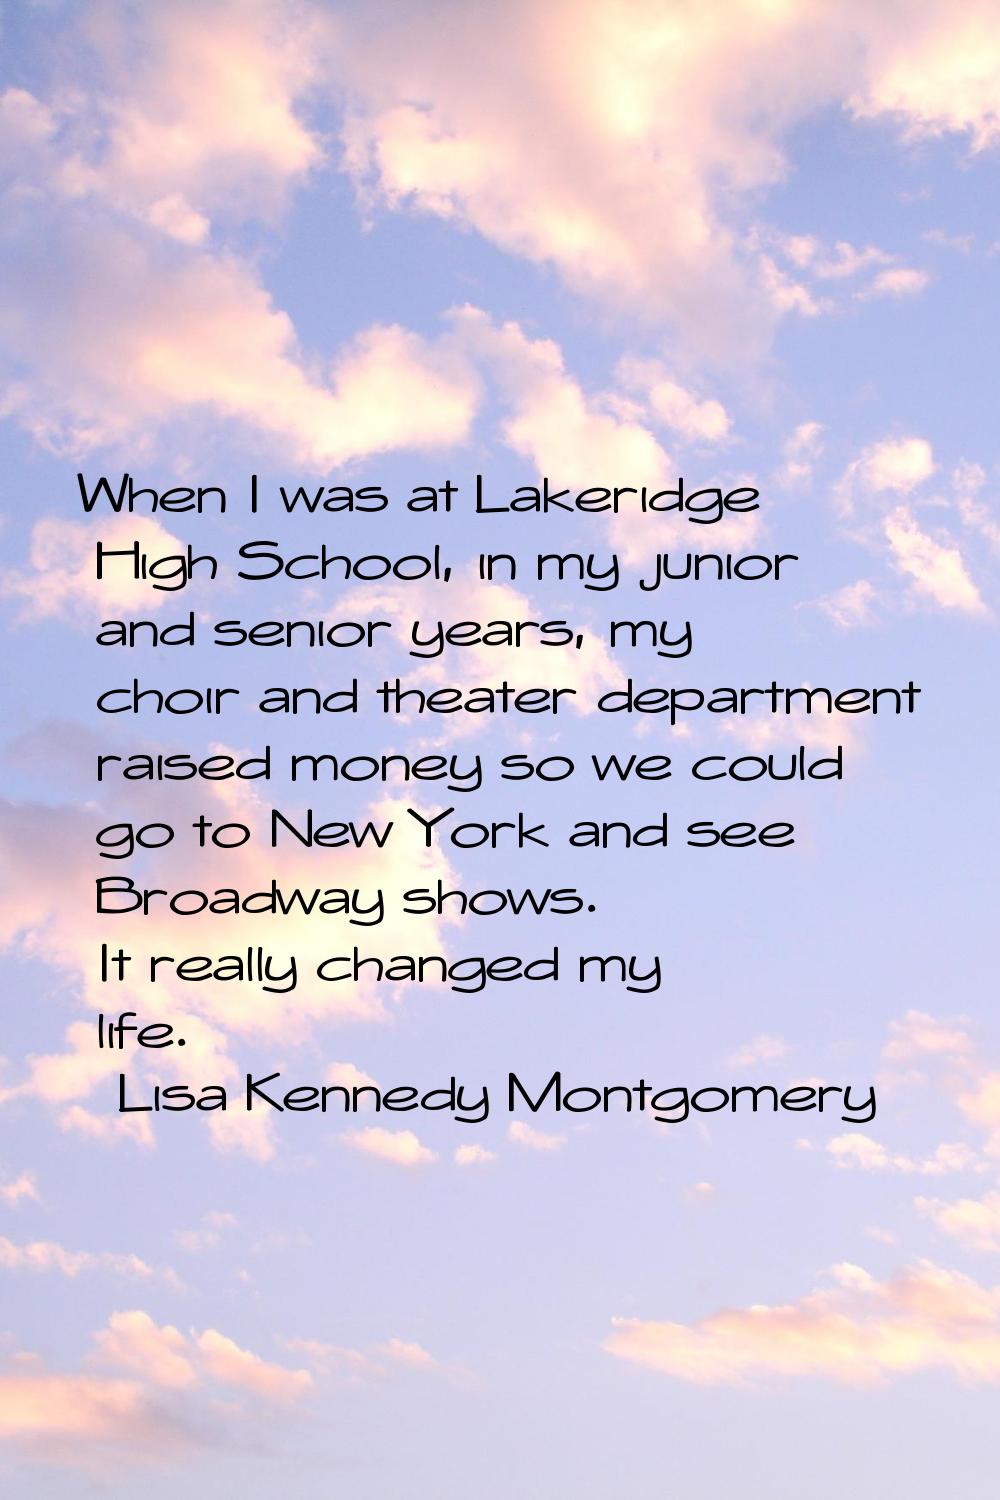 When I was at Lakeridge High School, in my junior and senior years, my choir and theater department